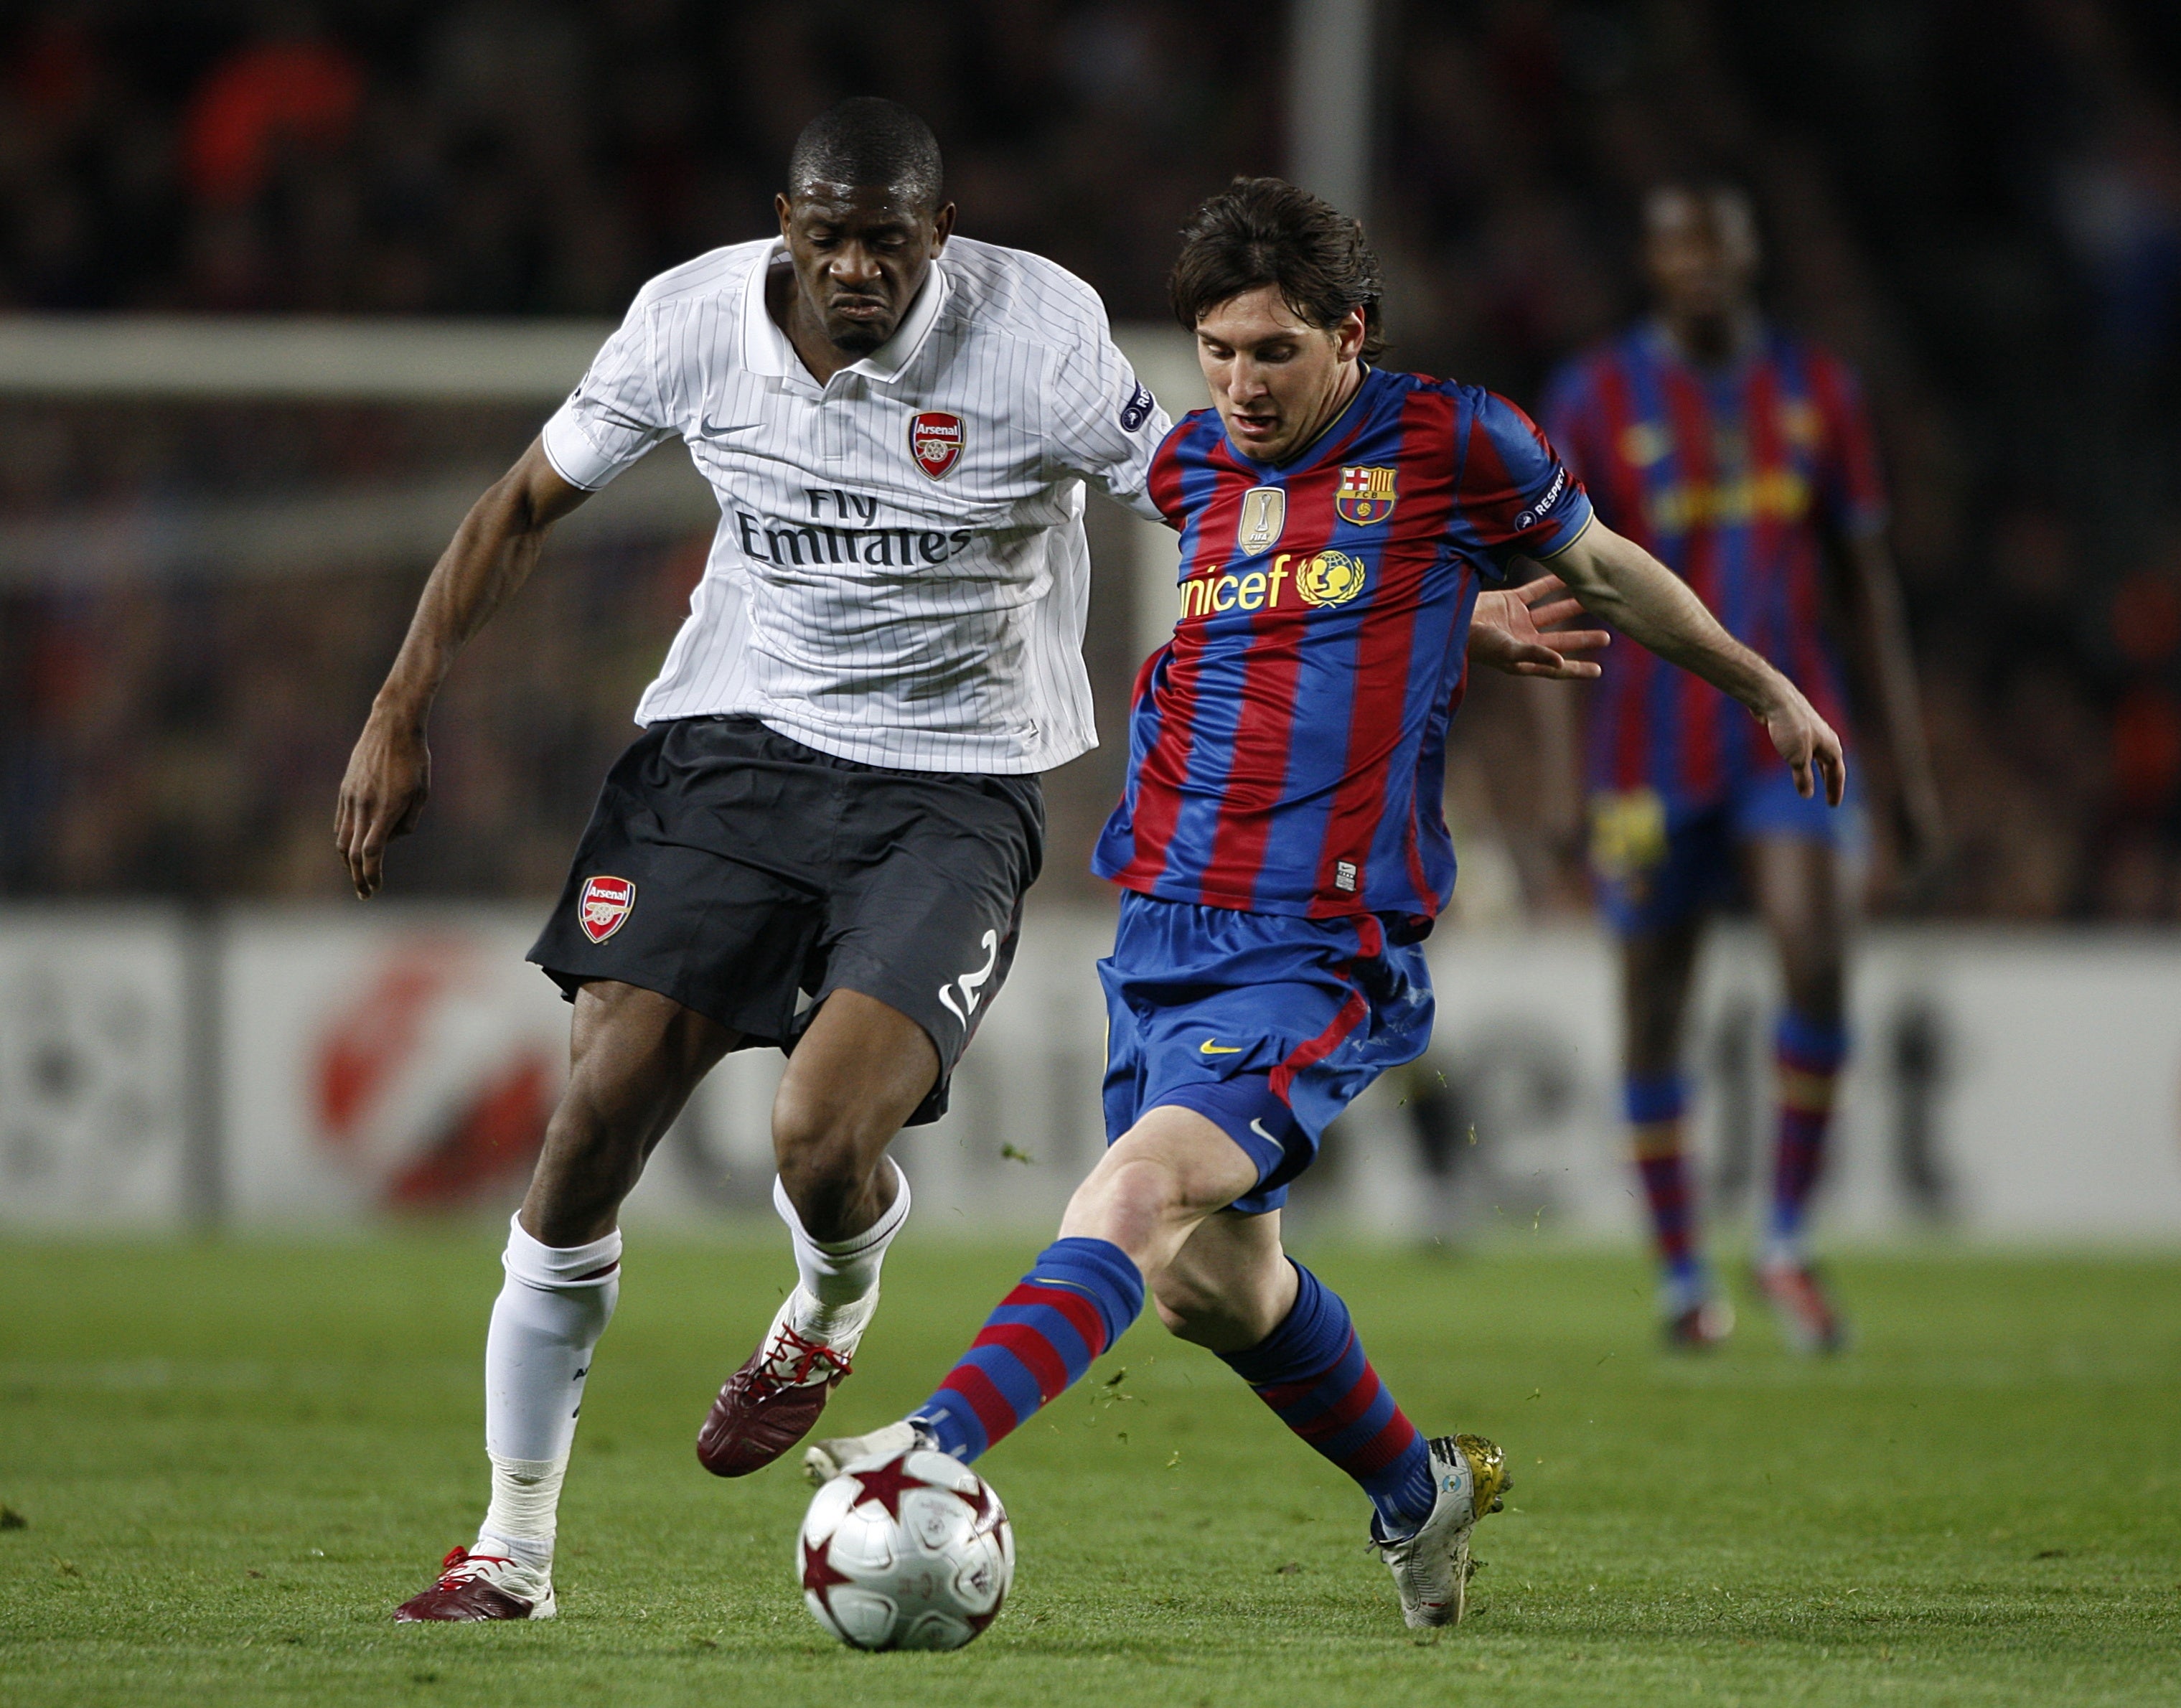 Lionel Messi, battling with Arsenal’s Abou Diaby, scored a record 672 goals in 778 games for Barcelona (Nick Potts/PA)